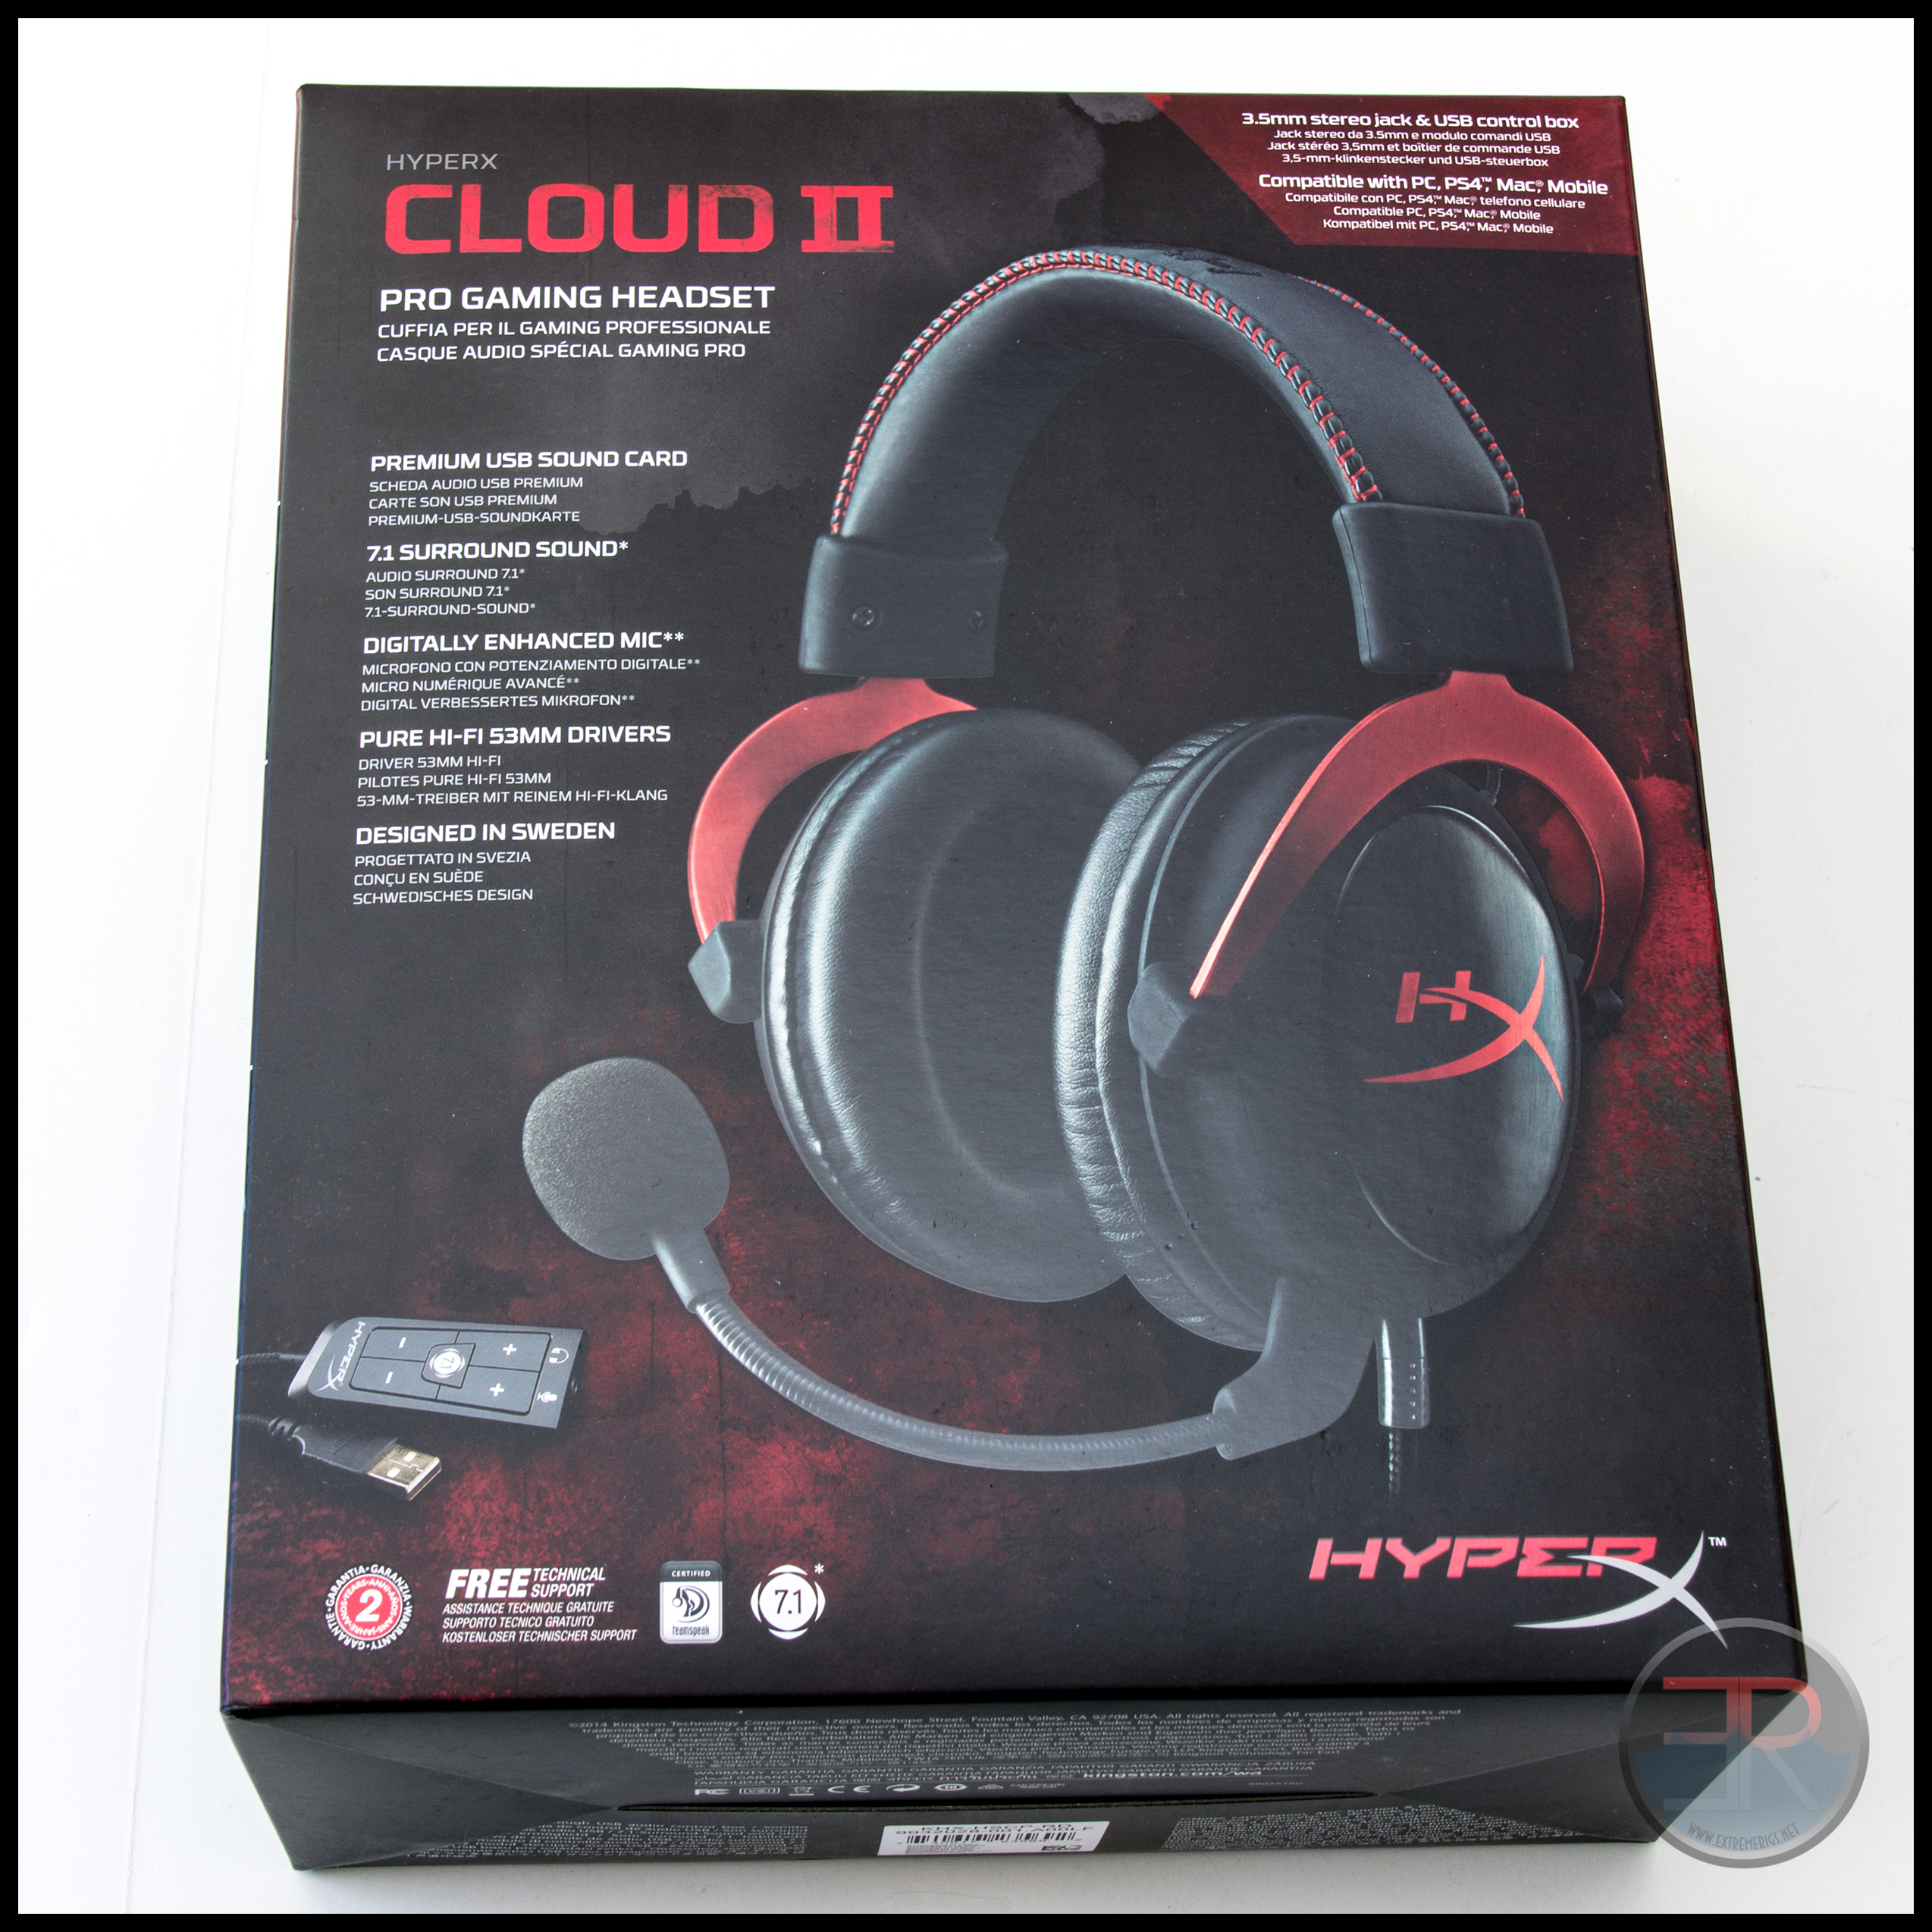 HyperX Cloud II Gaming Headset: New colourful headset introduced with an  audio control box and 7.1 virtual surround sound -  News